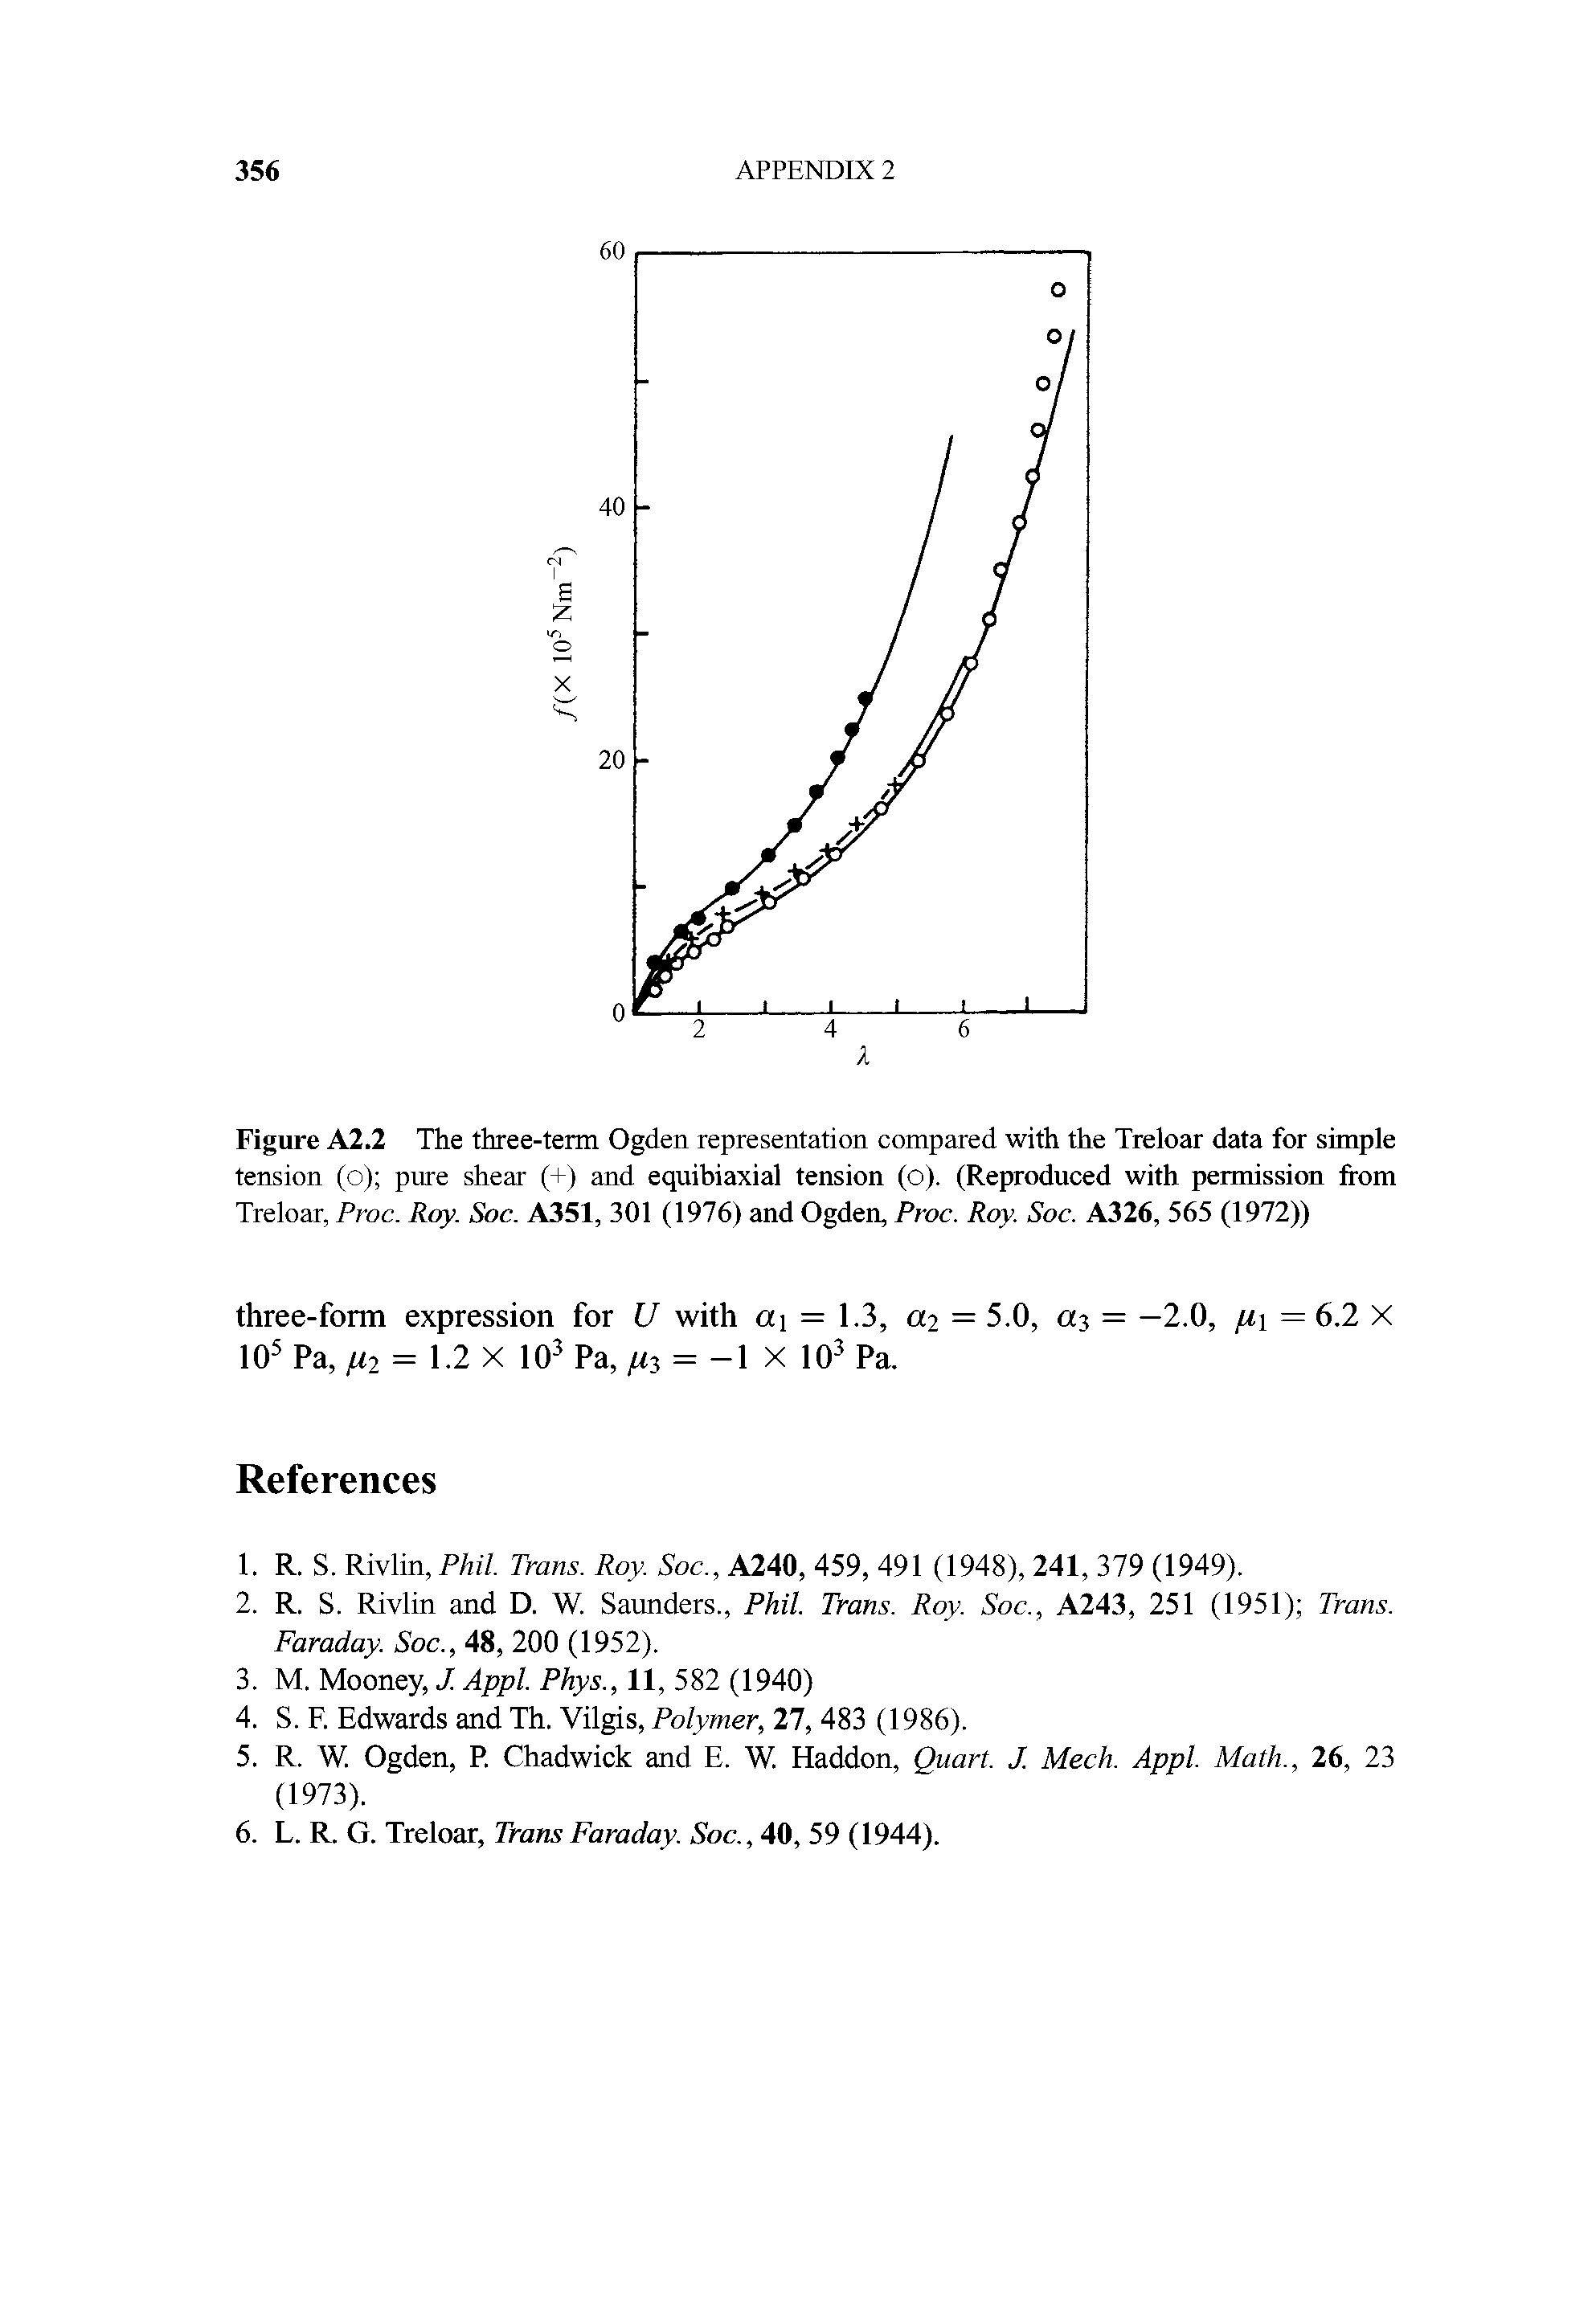 Figure A2.2 The three-term Ogden representation compared with the Treloar data for simple tension (o) pure shear (+) and equibiaxial tension (o). (Reproduced with permission from Treloar, Proc. Roy. Soc. A351, 301 (1976) and Ogden, Pwc. Roy. Soc. A326, 565 (1972))...